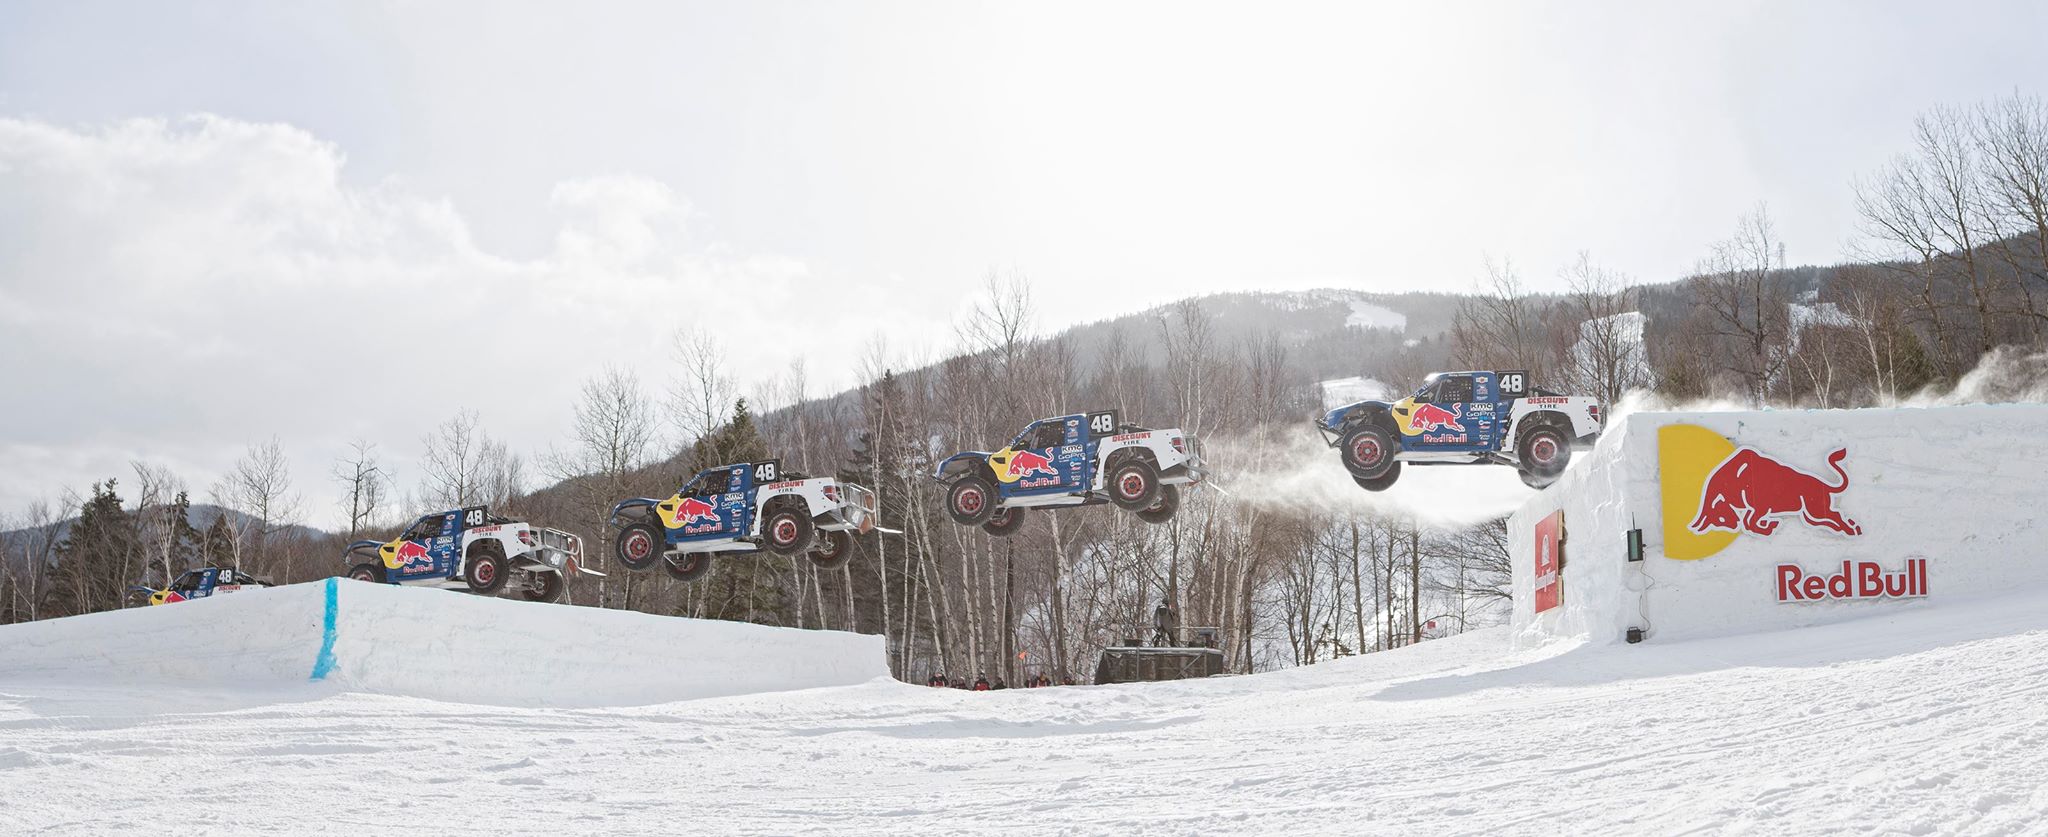 © Ricky Johnson by Garth Milan / Red Bull Content Pool